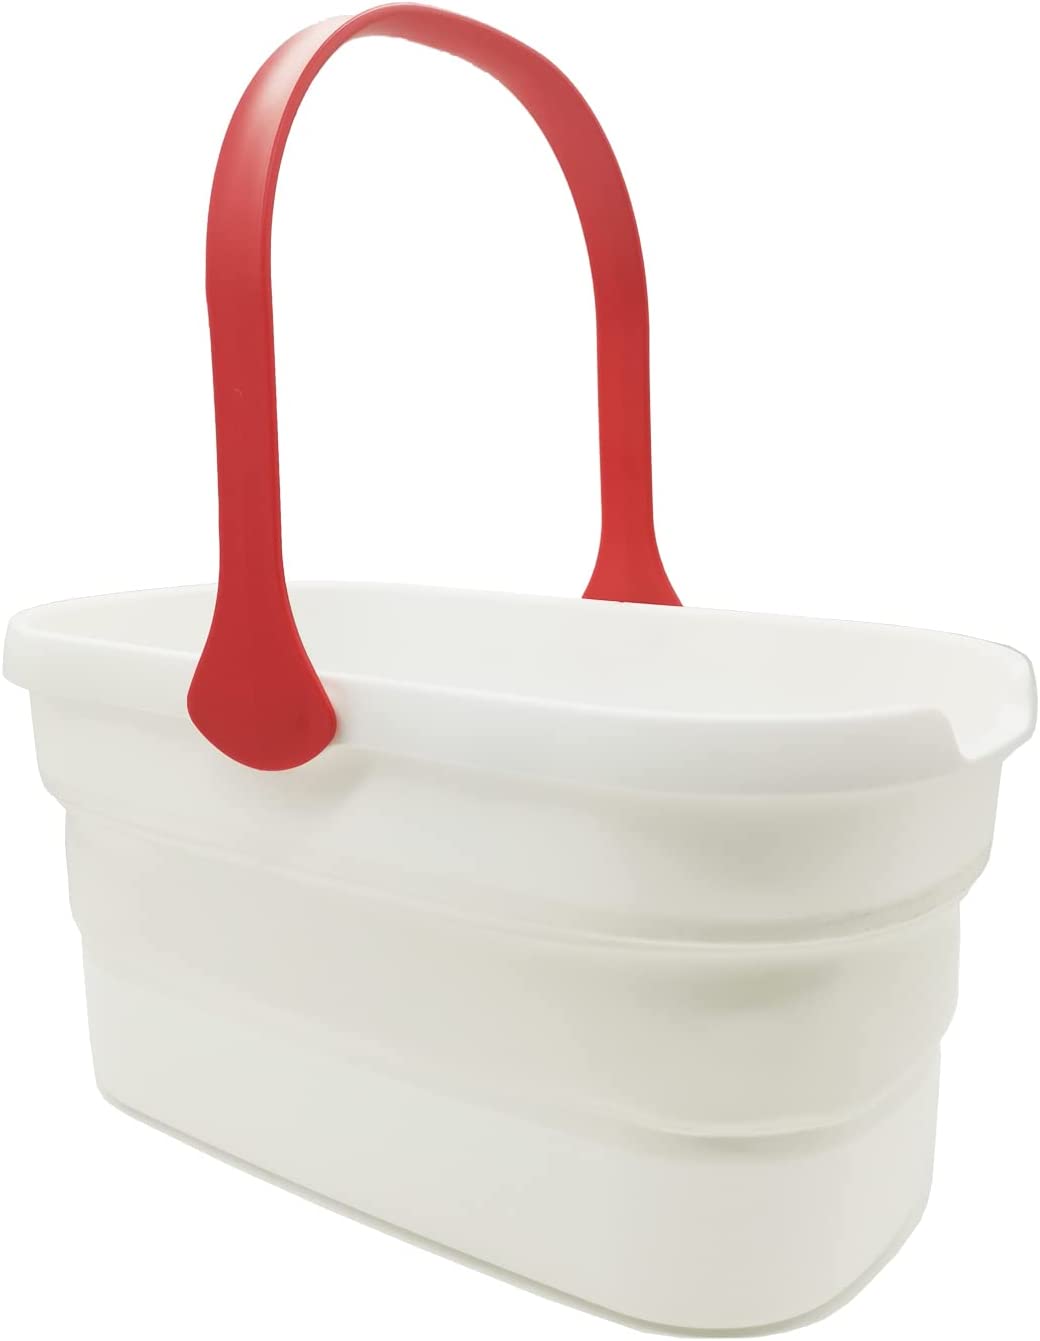 Folding Bucket in red color